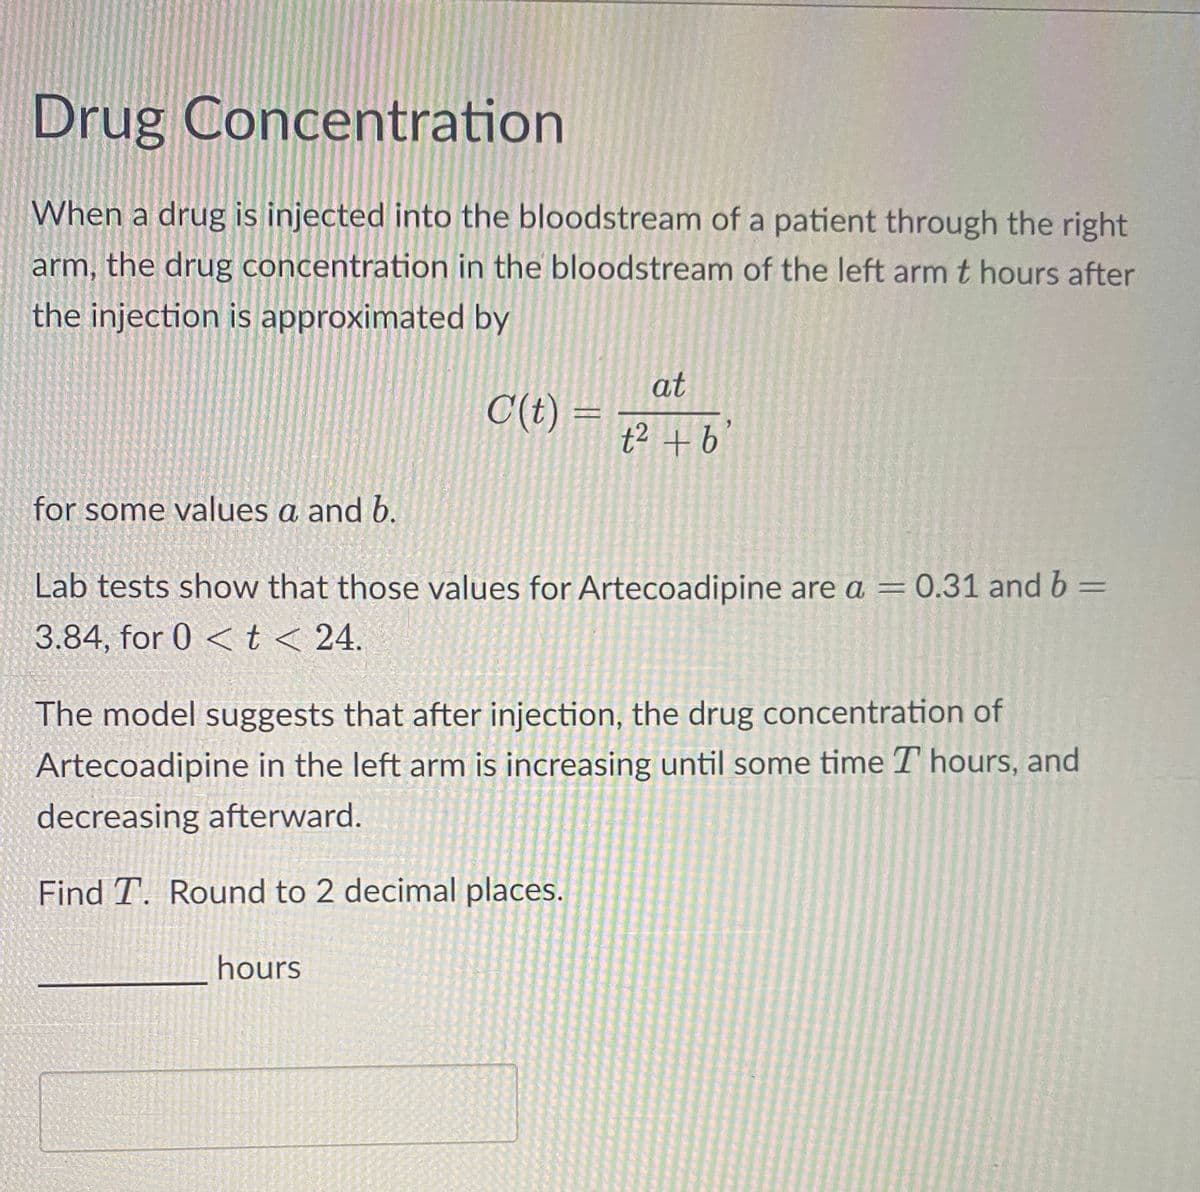 Drug Concentration
When a drug is injected into the bloodstream of a patient through the right
arm, the drug concentration in the bloodstream of the left arm t hours after
the injection is approximated by
at
C(t)= t² + b
for some values a and b.
Lab tests show that those values for Artecoadipine are a = 0.31 and b =
3.84, for 0 < t < 24.
The model suggests that after injection, the drug concentration of
Artecoadipine in the left arm is increasing until some time I hours, and
decreasing afterward.
Find T. Round to 2 decimal places.
hours